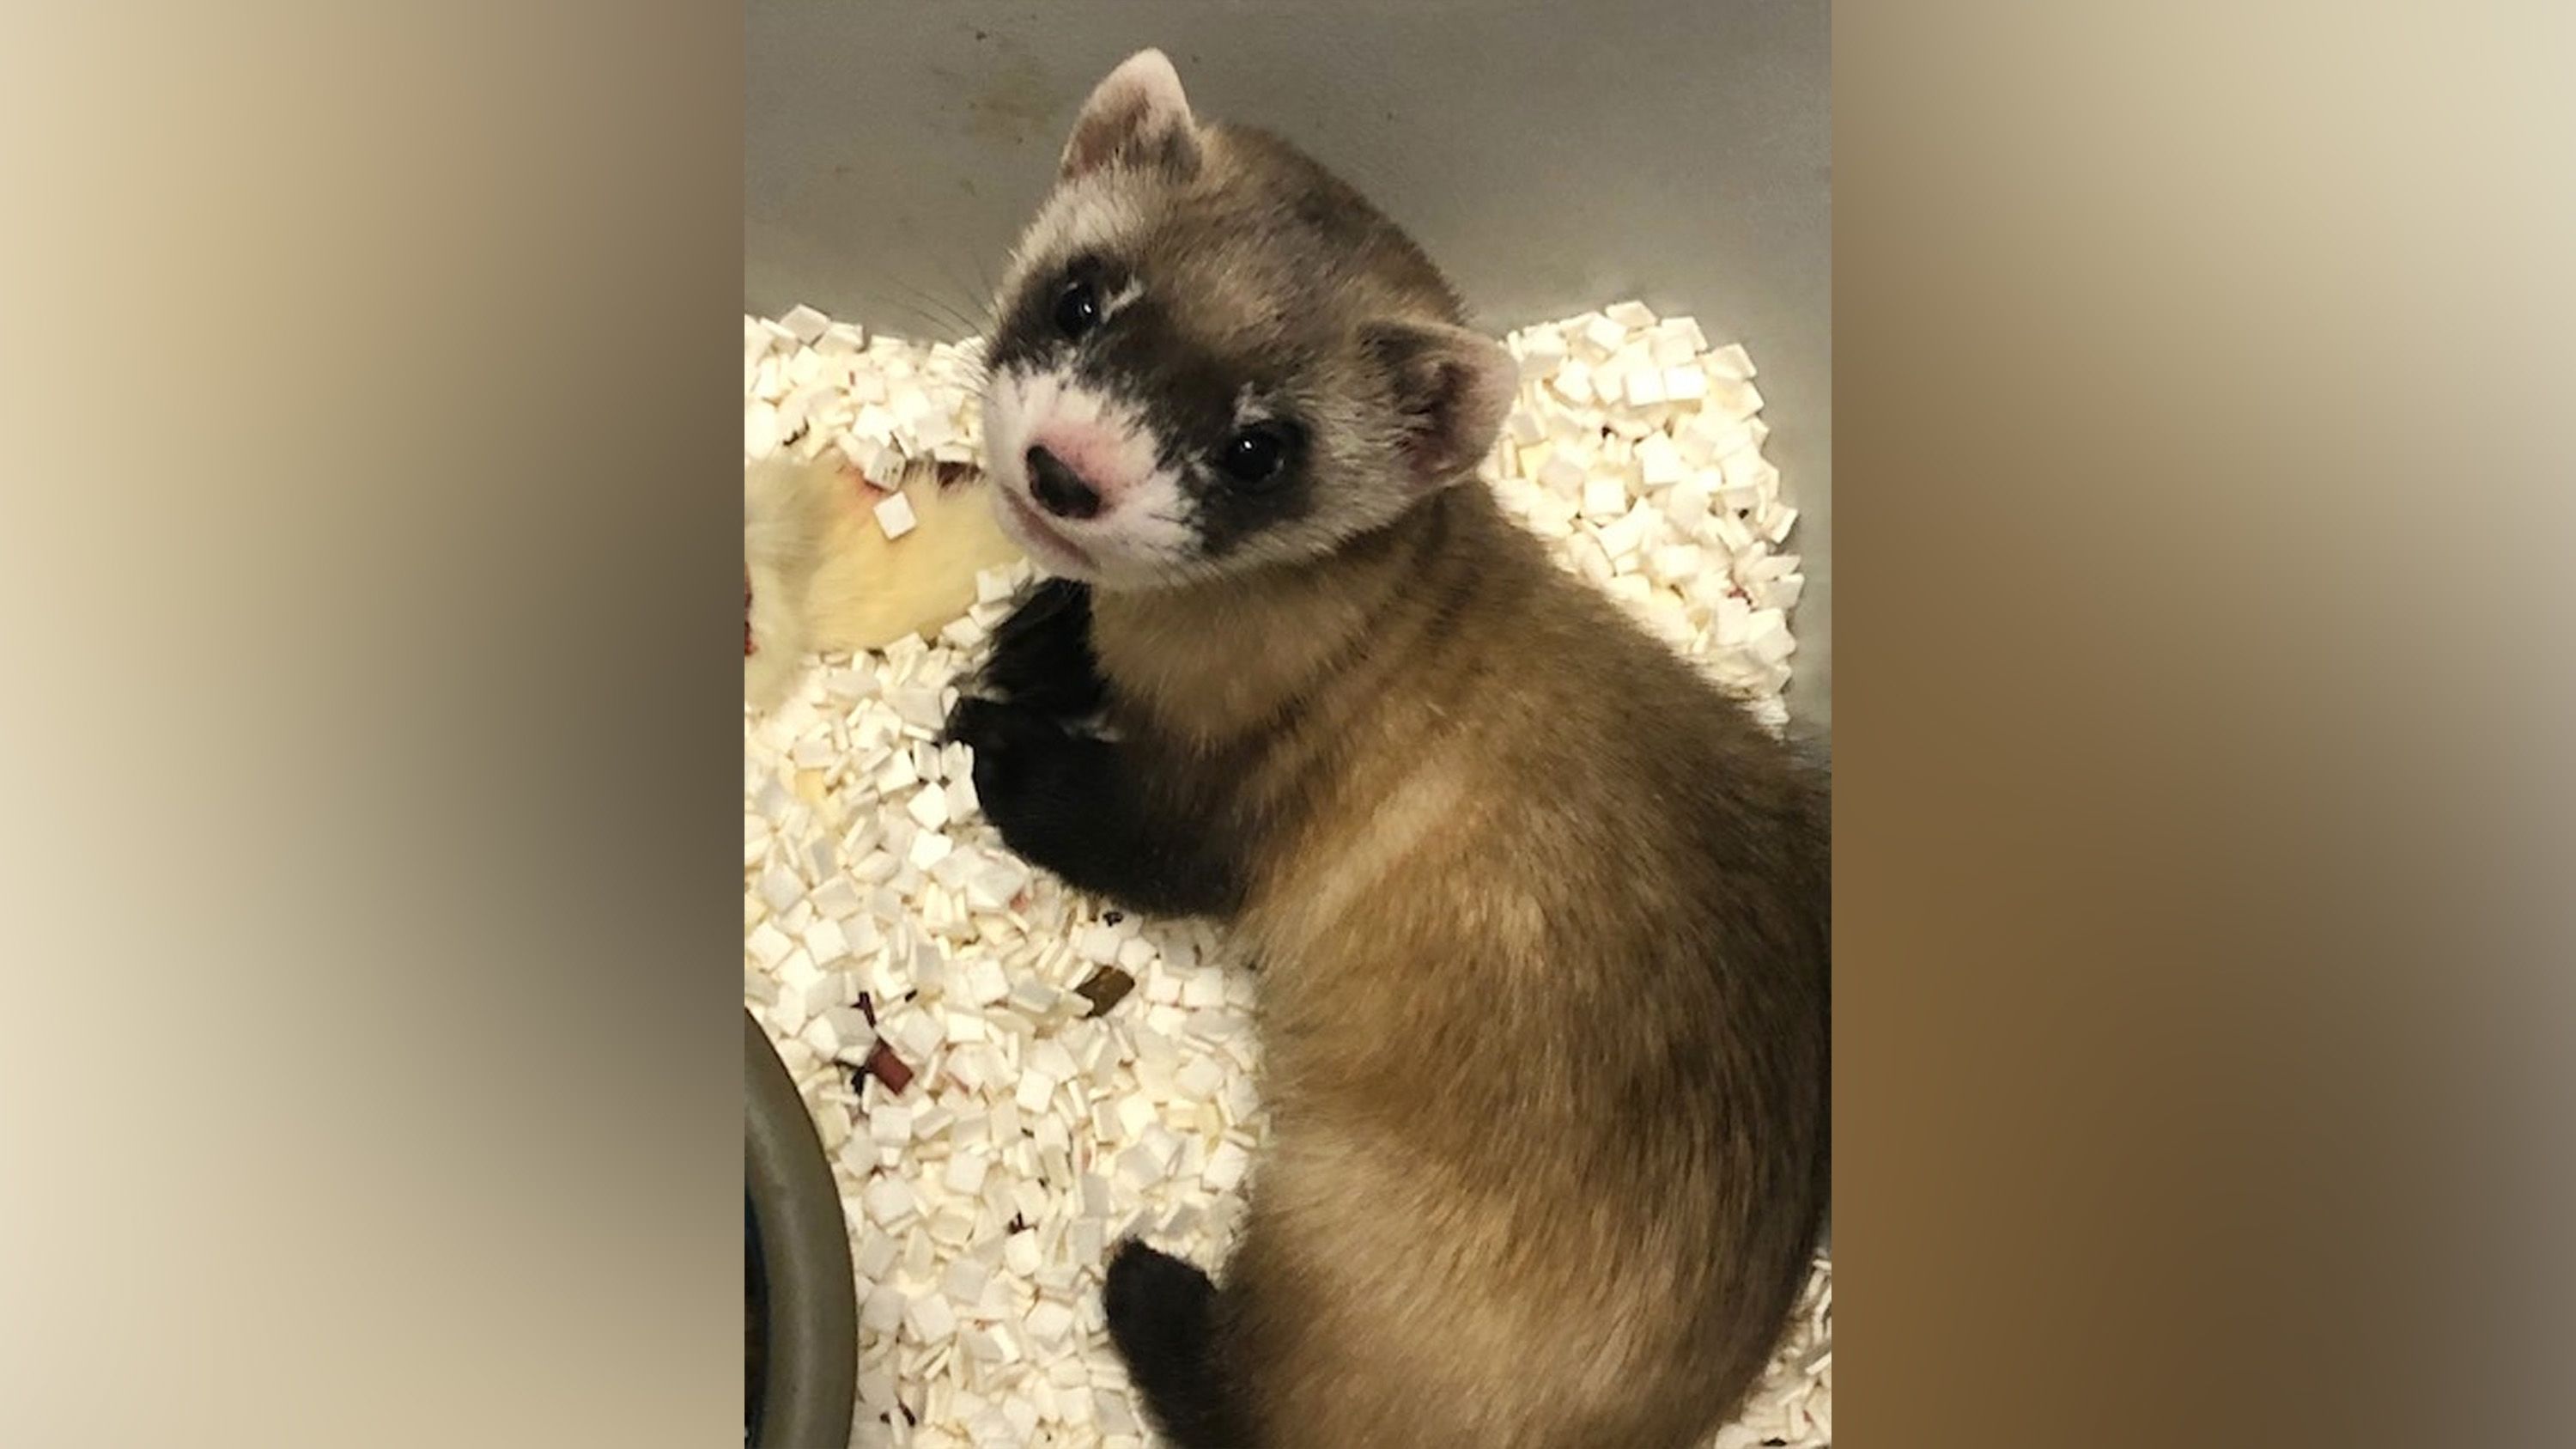 Black-footed ferret is first endangered American animal to be cloned | CNN